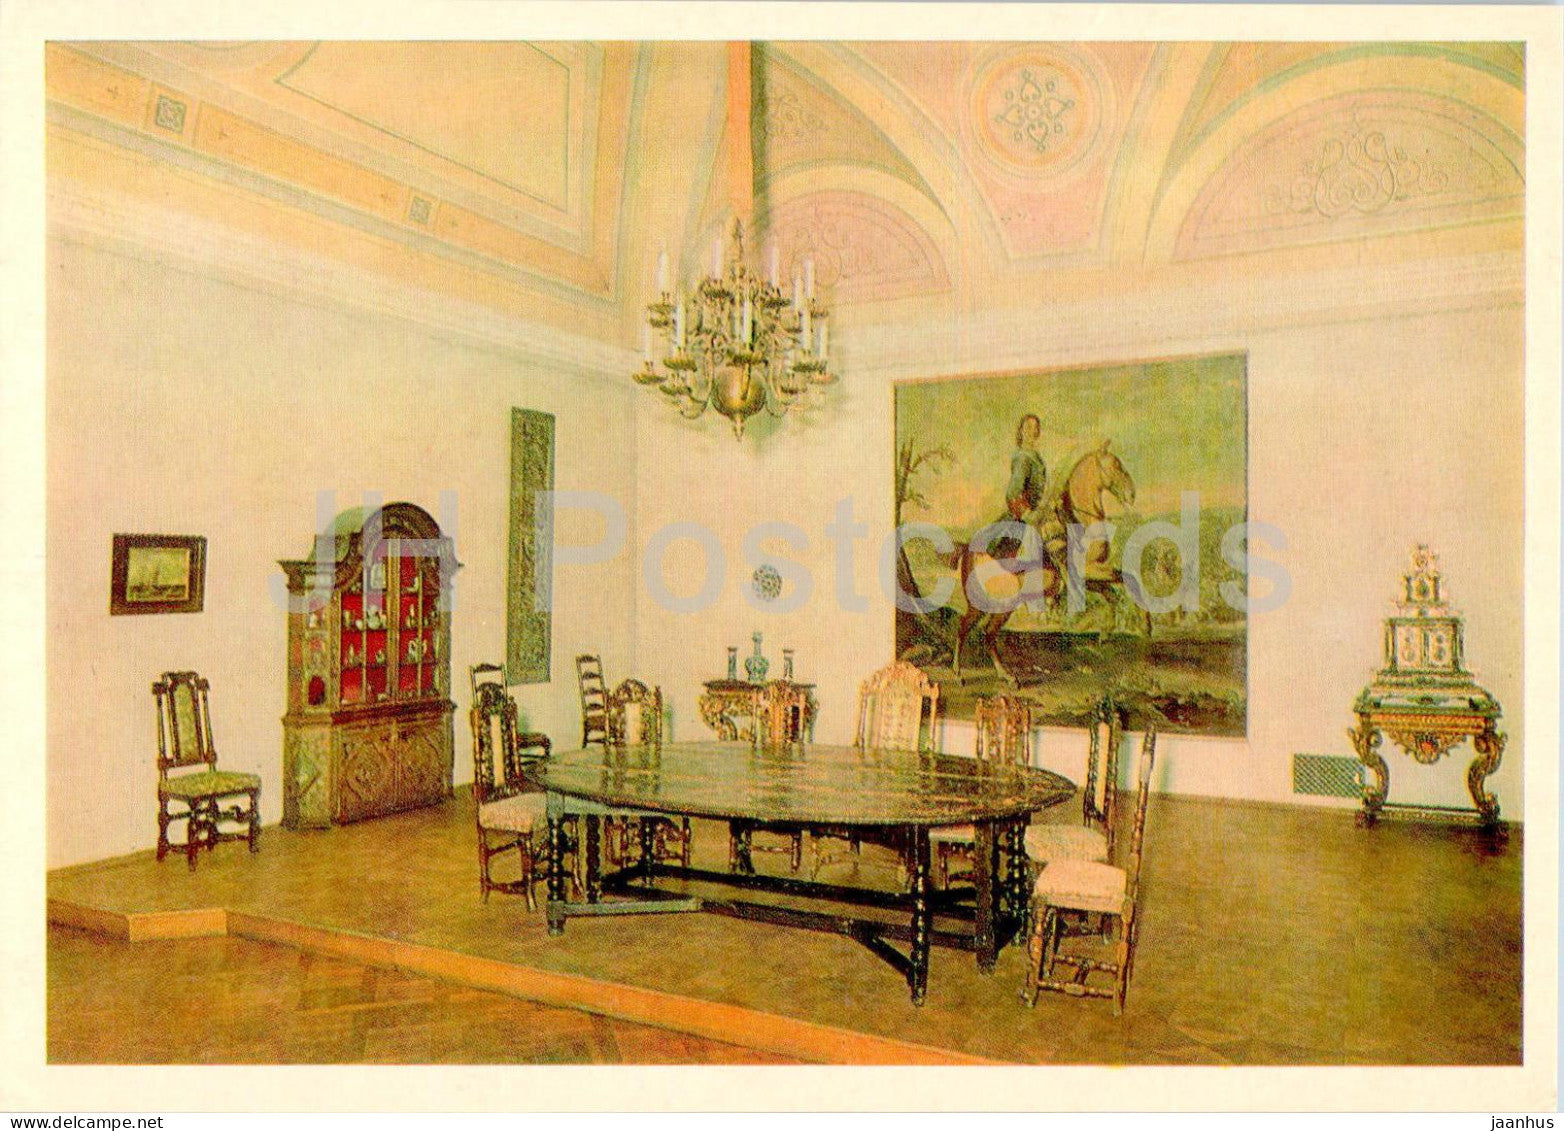 Leningrad - St Petersburg - Hermitage - Room of Russian applied art in the Winter Palace - 1984 - Russia USSR - unused - JH Postcards